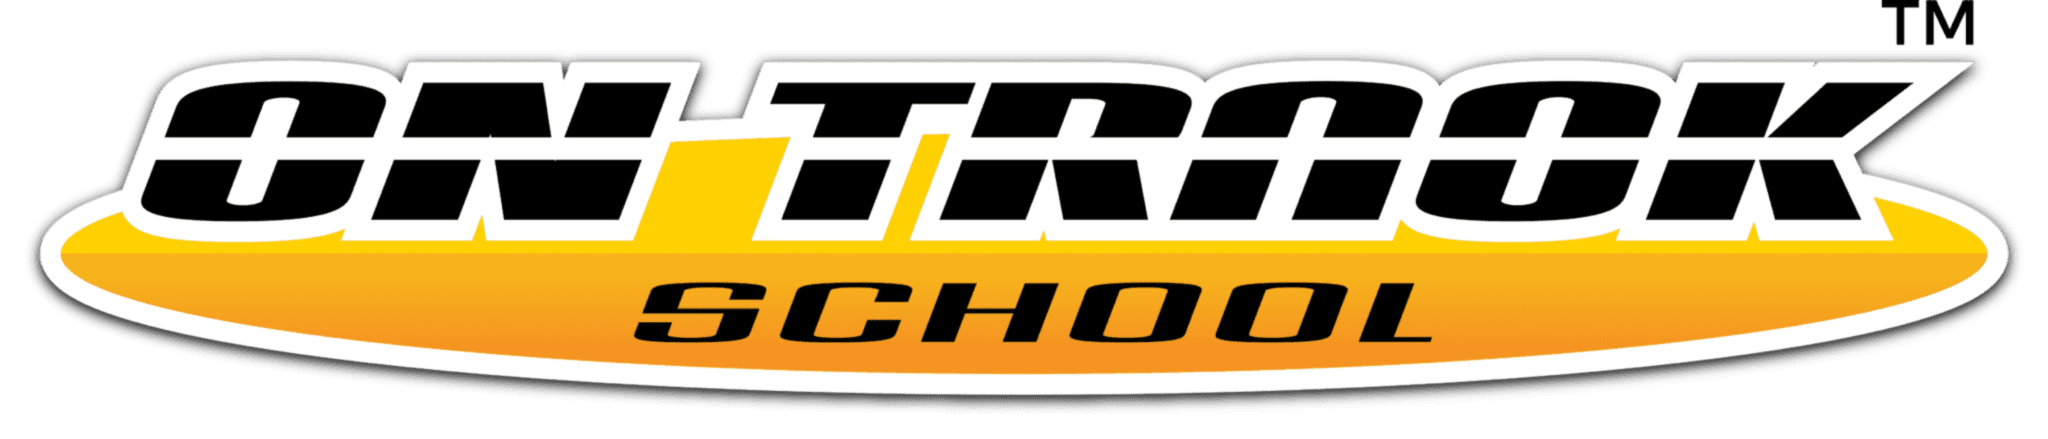 https://www.ontrackschool.com/wp-content/uploads/2020/06/cropped-Copy-of-On-Track-School-Logo_New.png